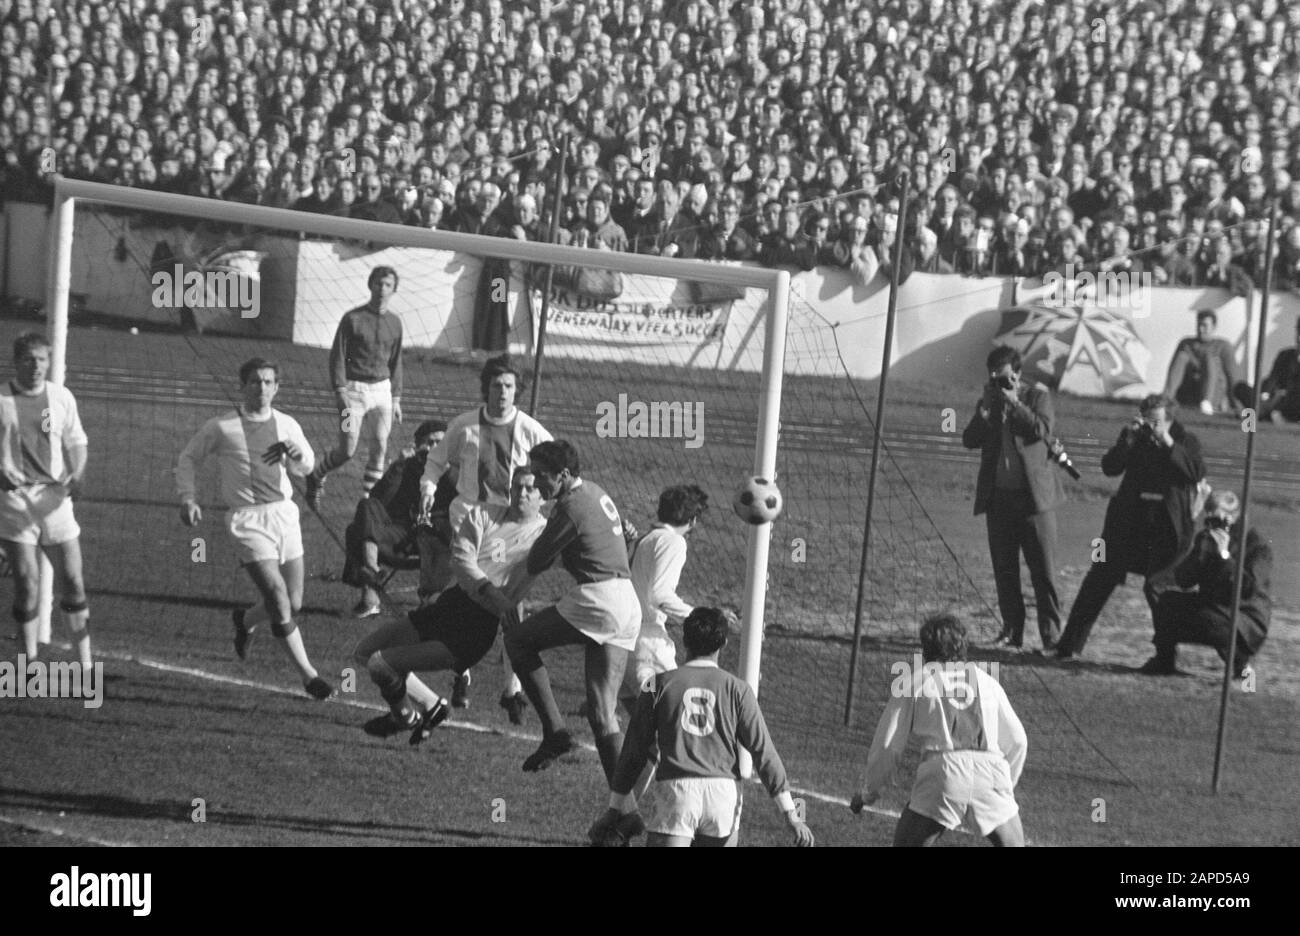 Ajax against Benfica 3-0, decision match quarterfinals European Cup I in Paris game moments (from high point of view) Date: March 5, 1969 Location: France, Paris Keywords: sport, football Institution name: Benfica Stock Photo